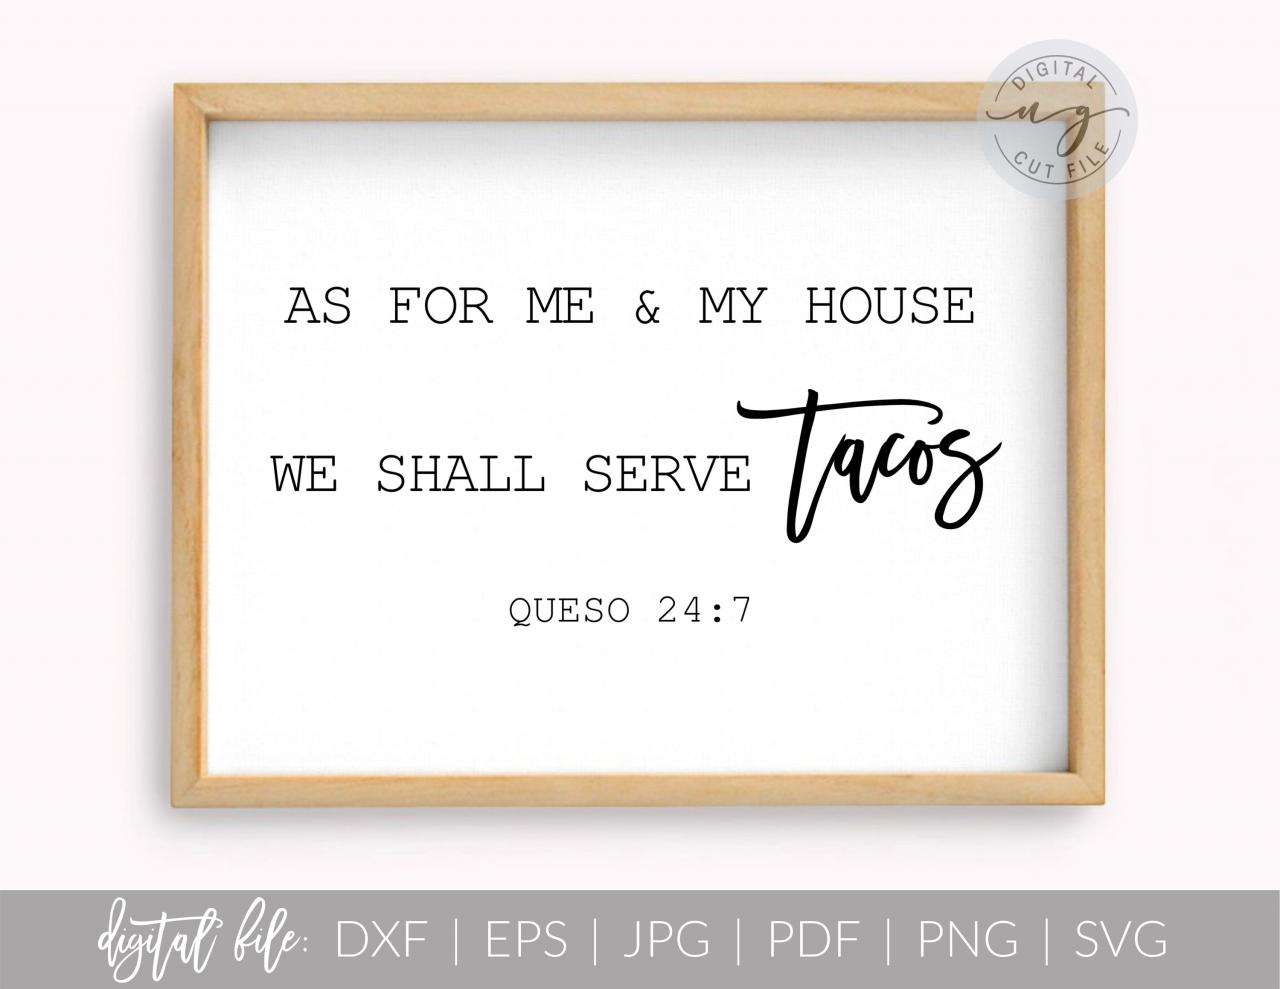 We Shall Serve Tacos Quote Sign | Taco Verse | Svg, Dxf Cut File | Pdf Print File | Cricut Cameo Silhouette | Png Clipart | Instant Download